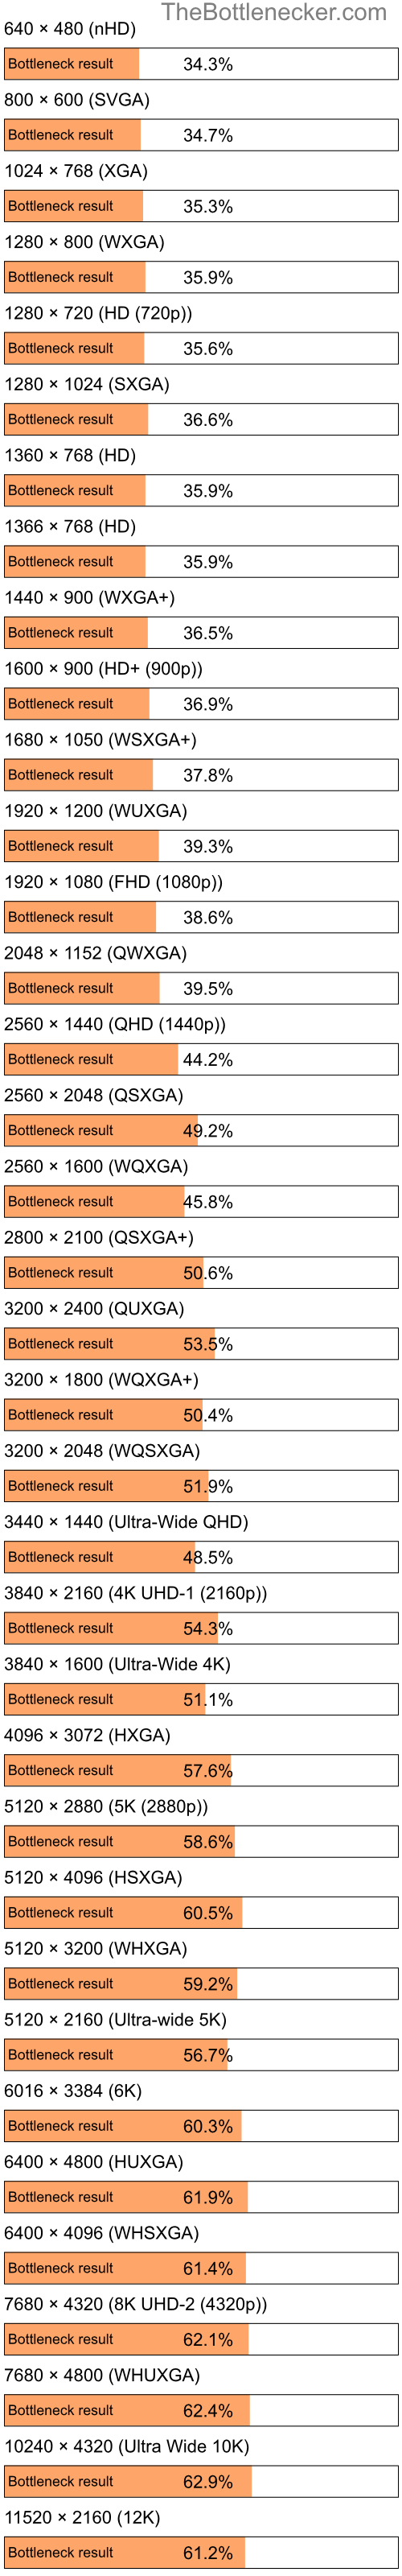 Bottleneck results by resolution for Intel Core i5-13600KF and NVIDIA GeForce GTX 1650 in Graphic Card Intense Tasks